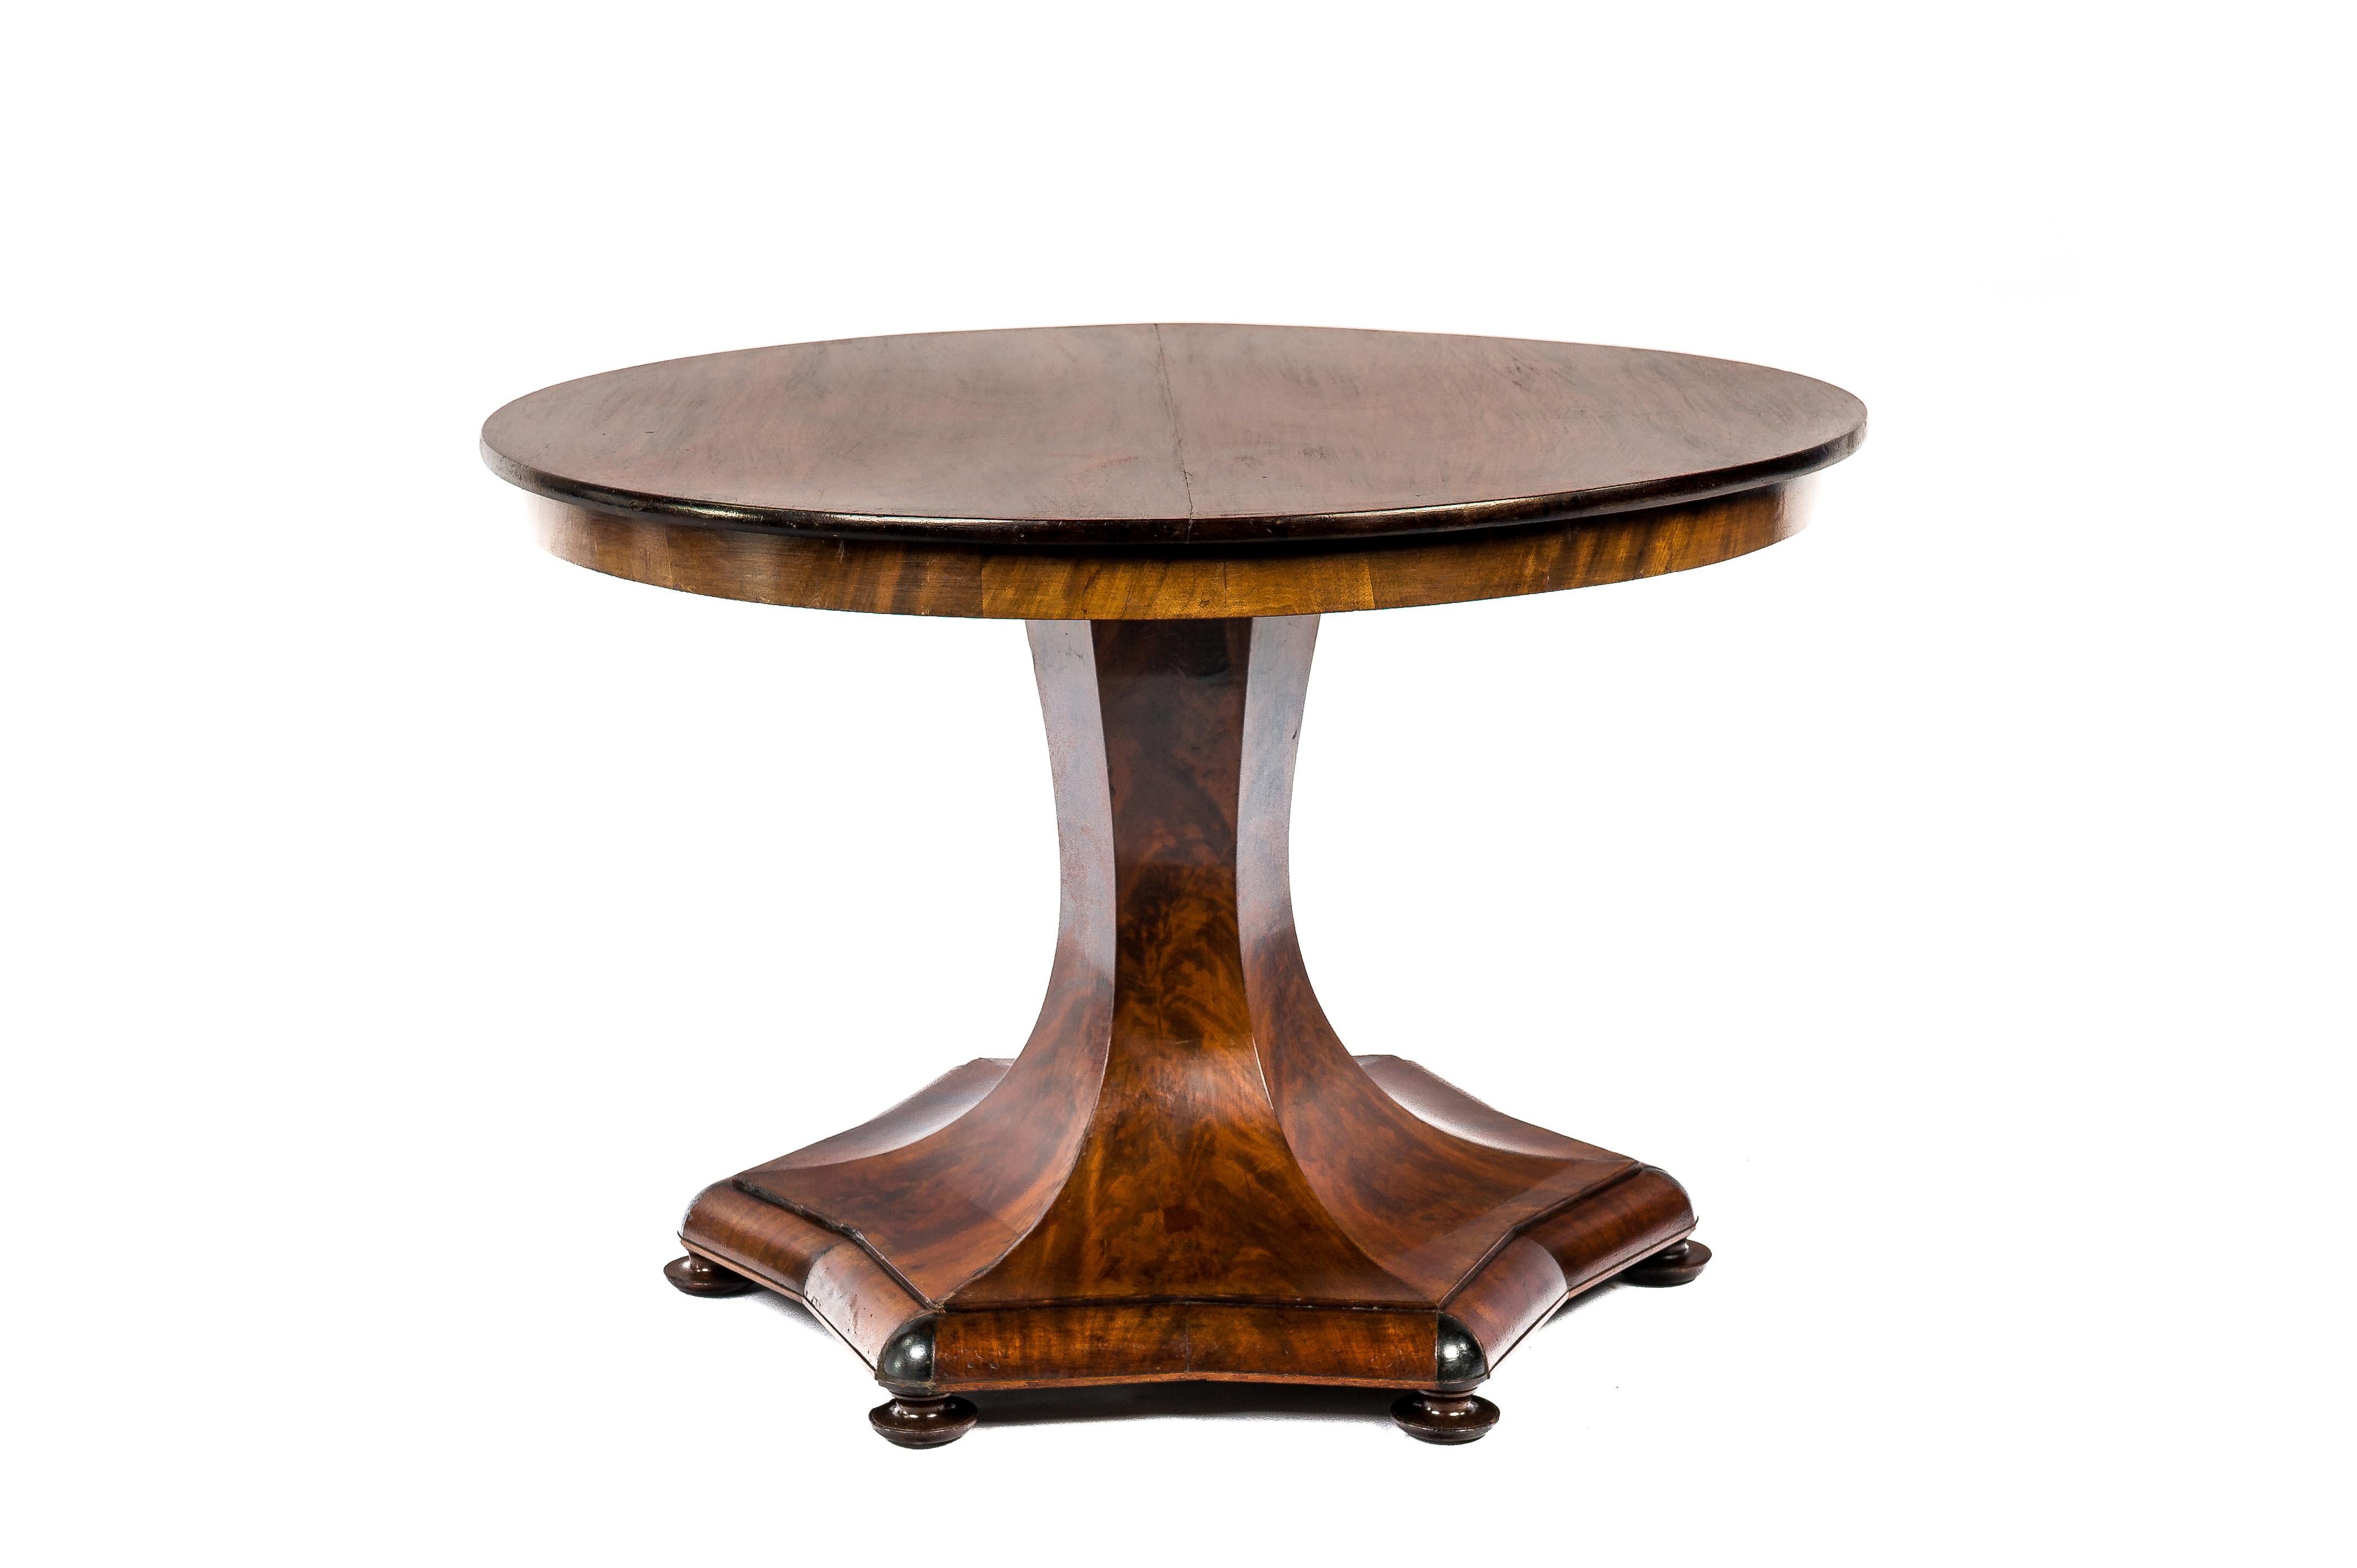 Antique 19th Century Dutch Empire Round Mahogany Table on a Hexagonal Base For Sale 5